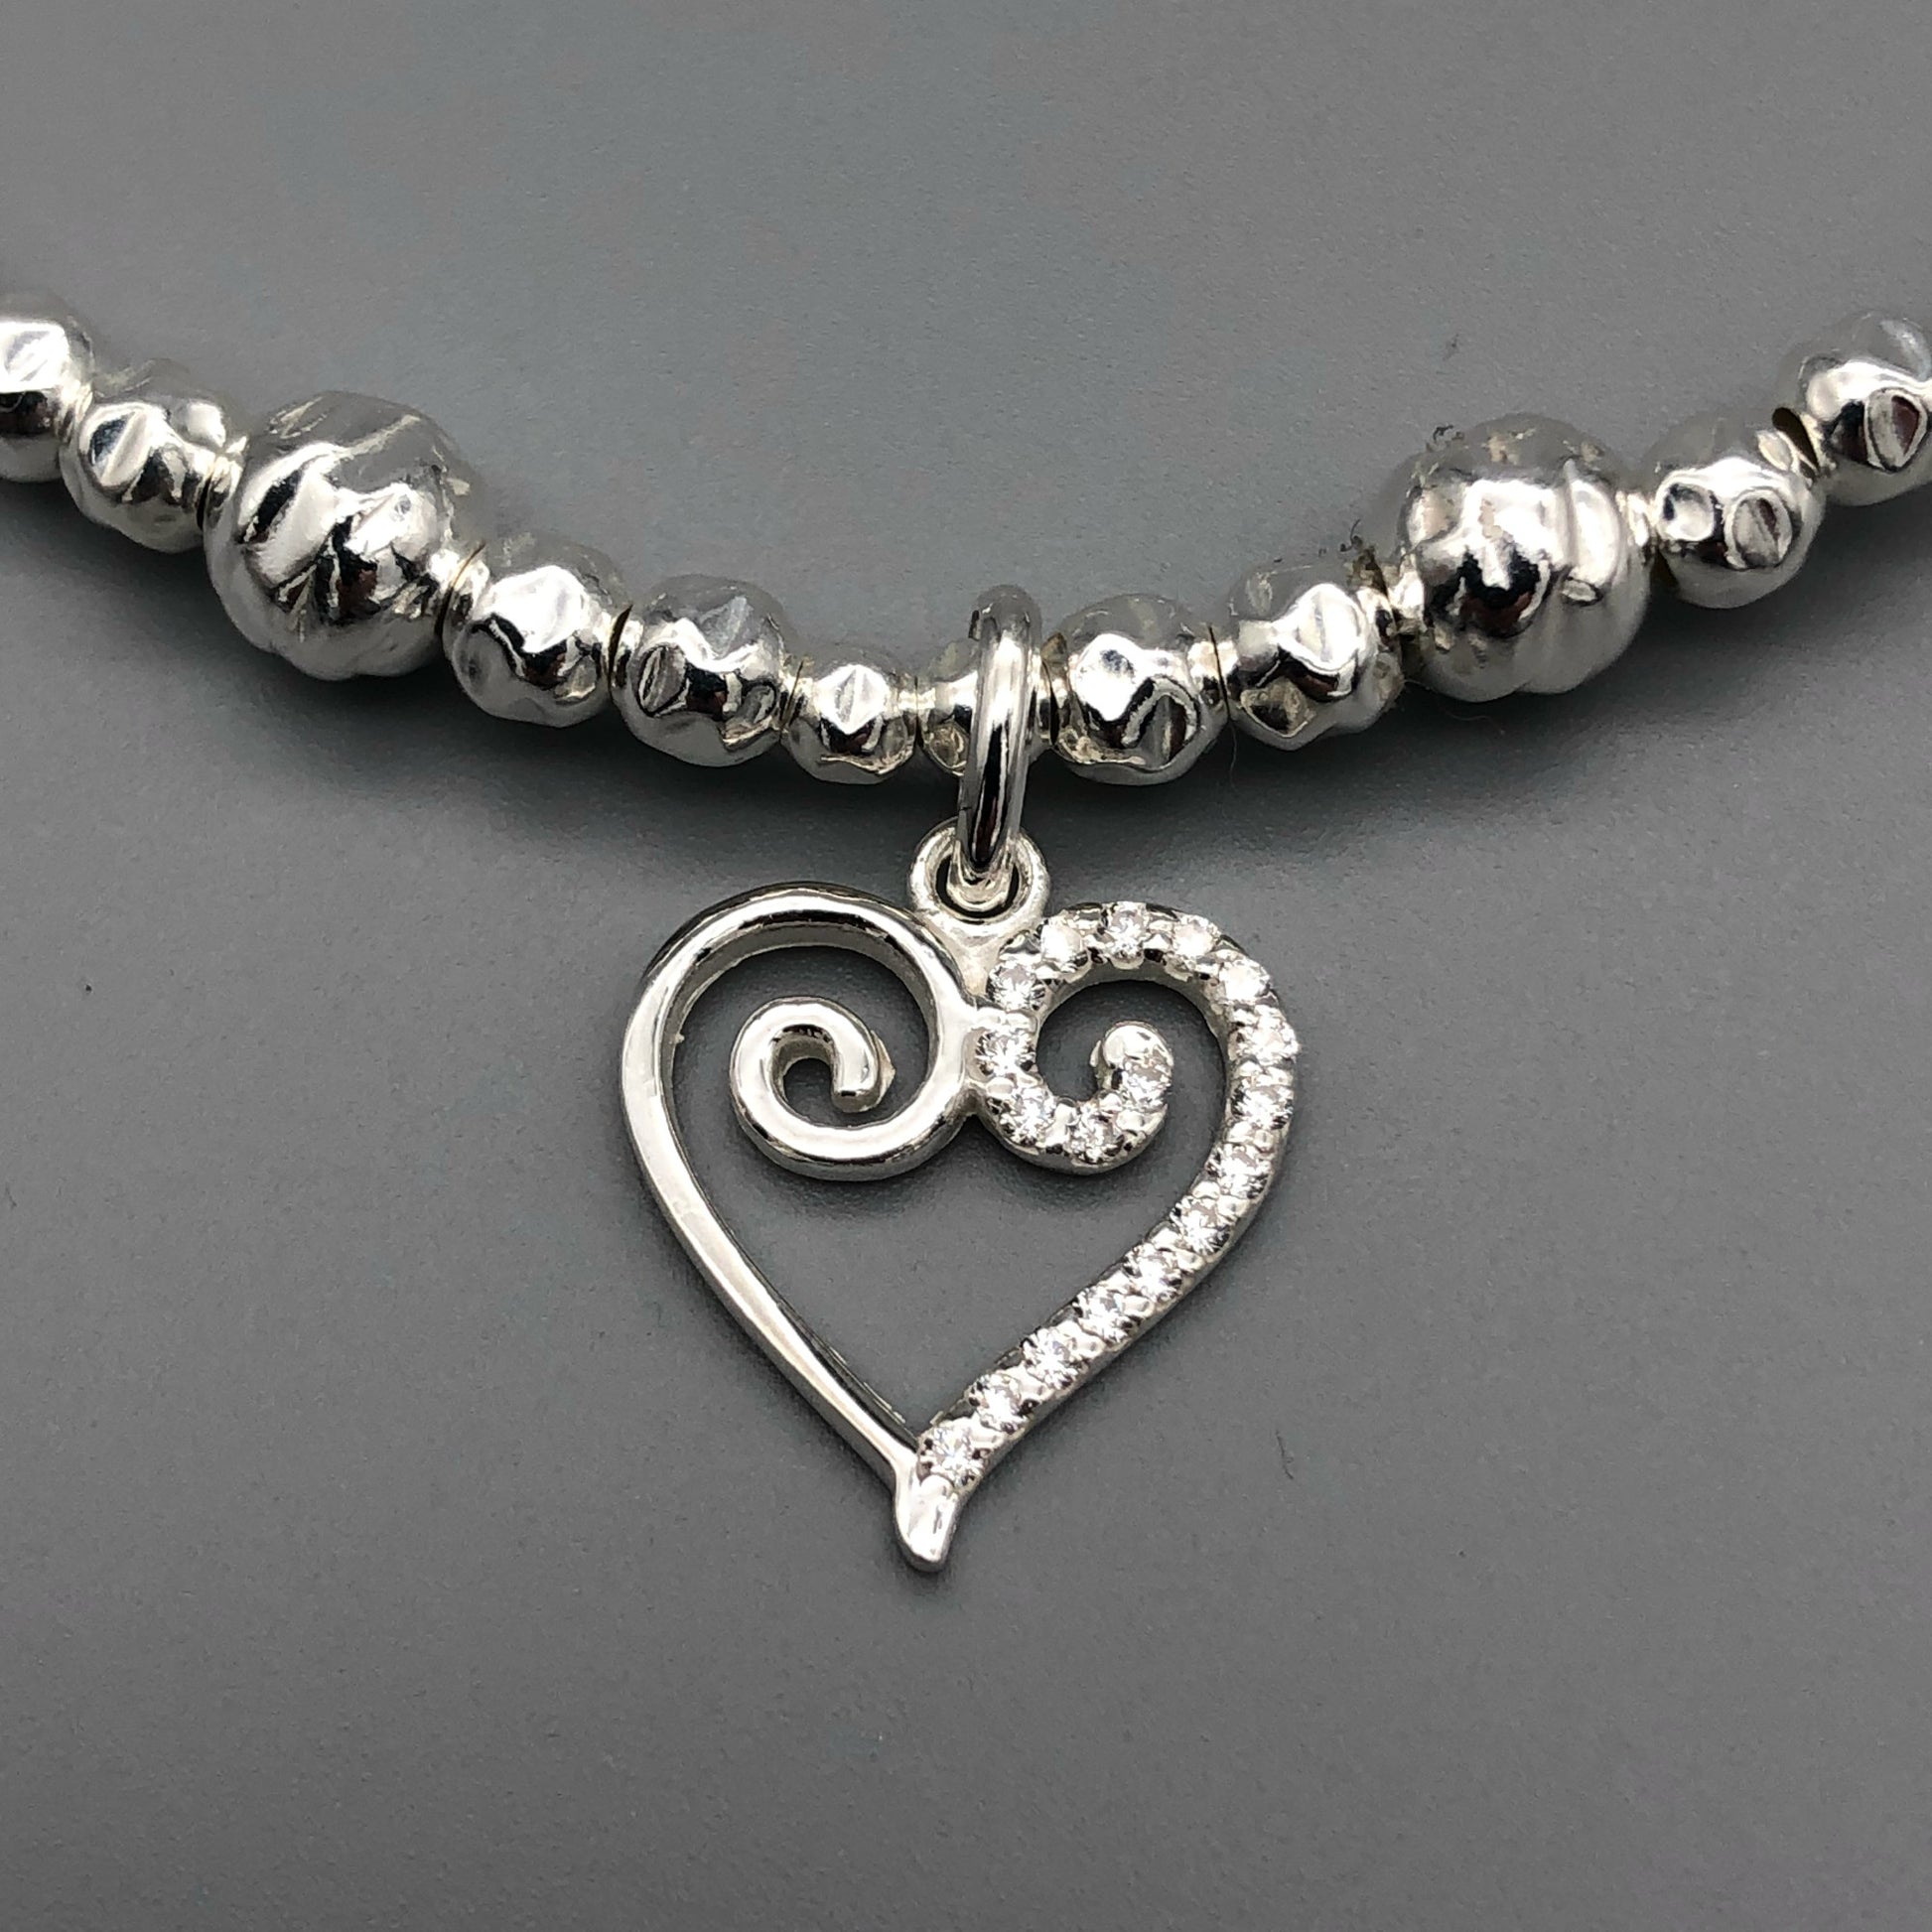 Closeup of Scroll heart charm sterling silver hand-made women's stacking bracelet by My Silver Wish